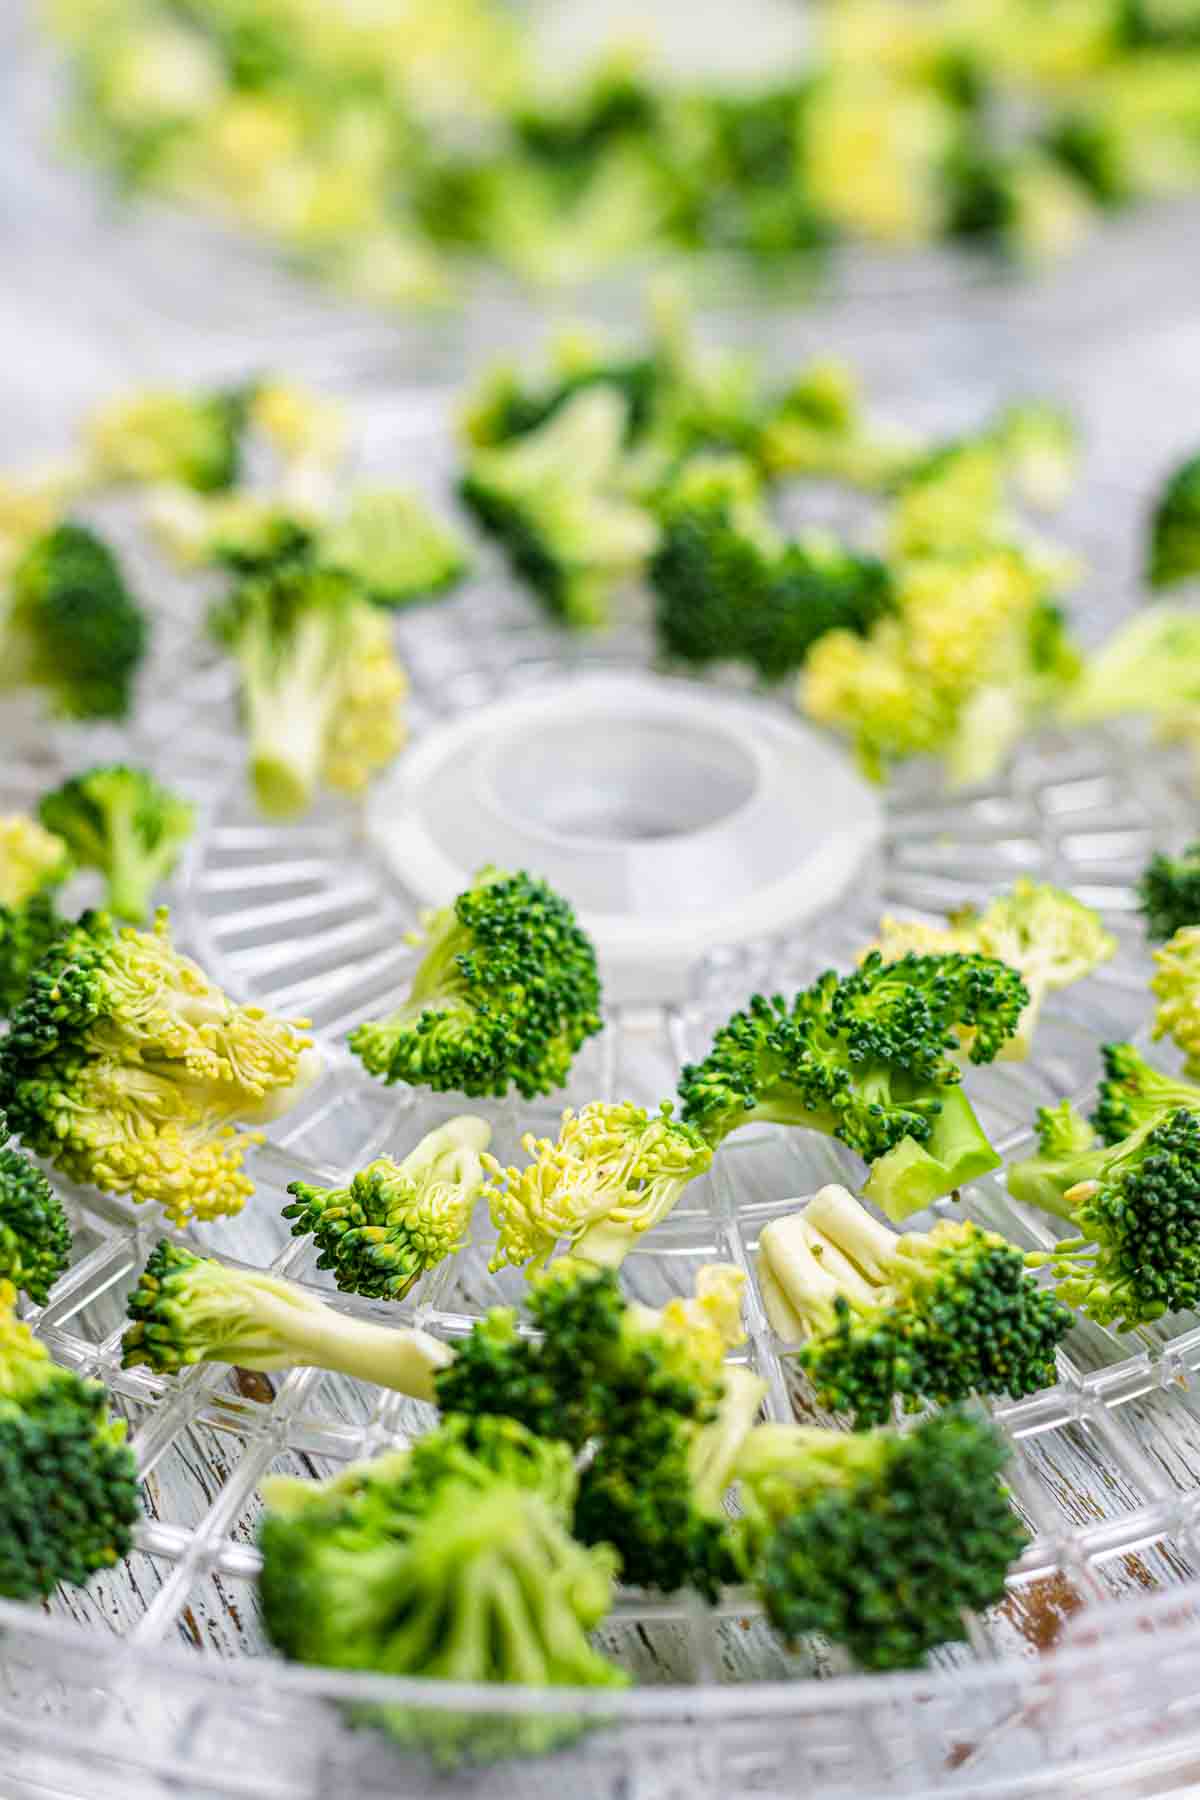 Dehydrated broccoli chips close up.